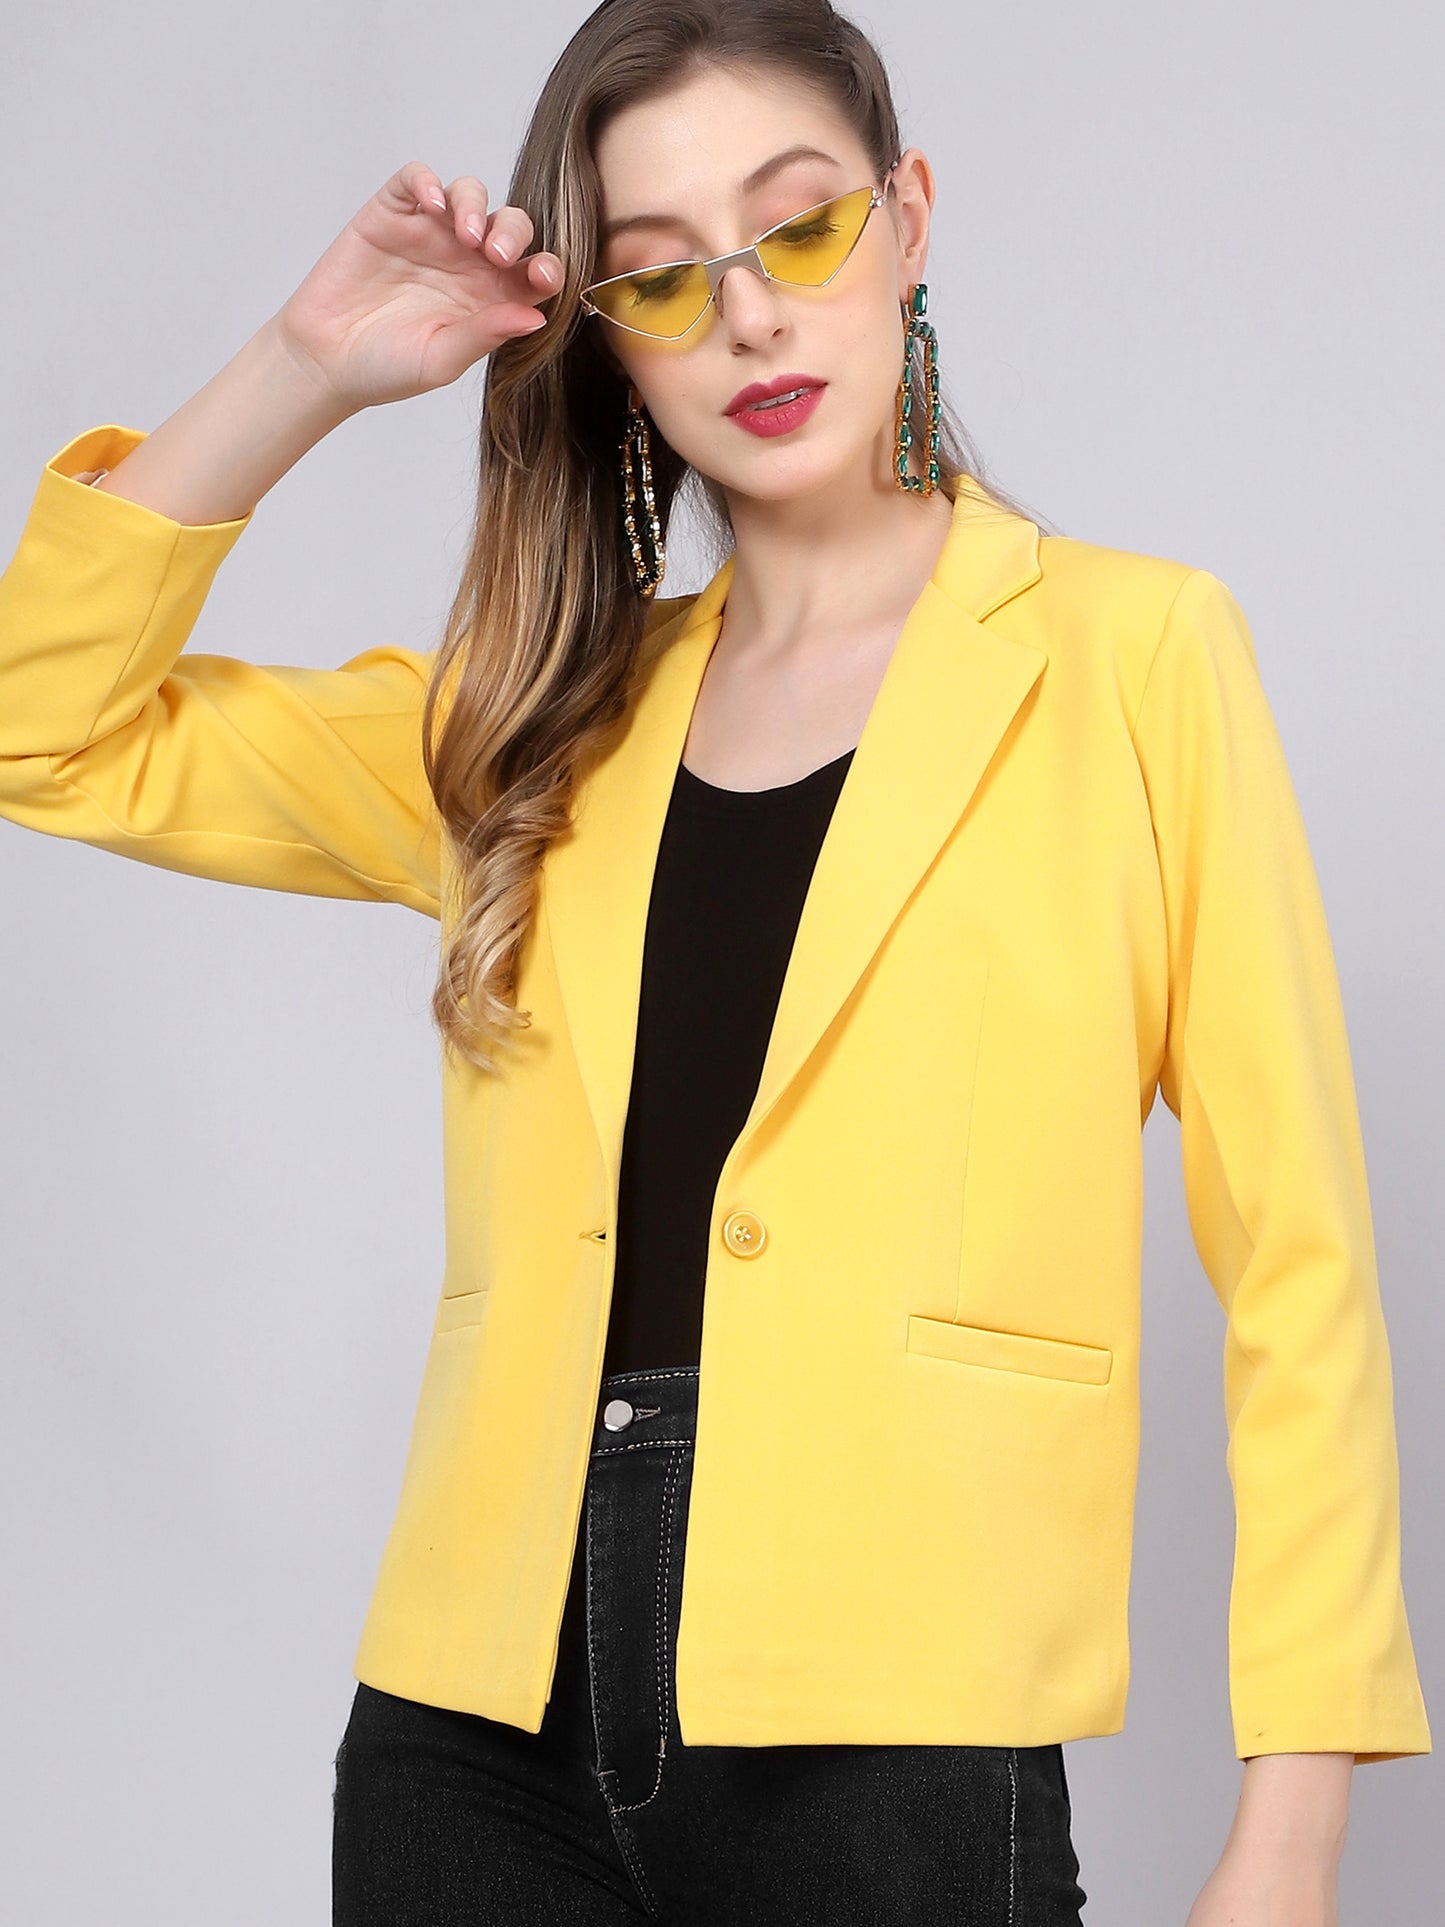 All About You Solid Yellow Blazer